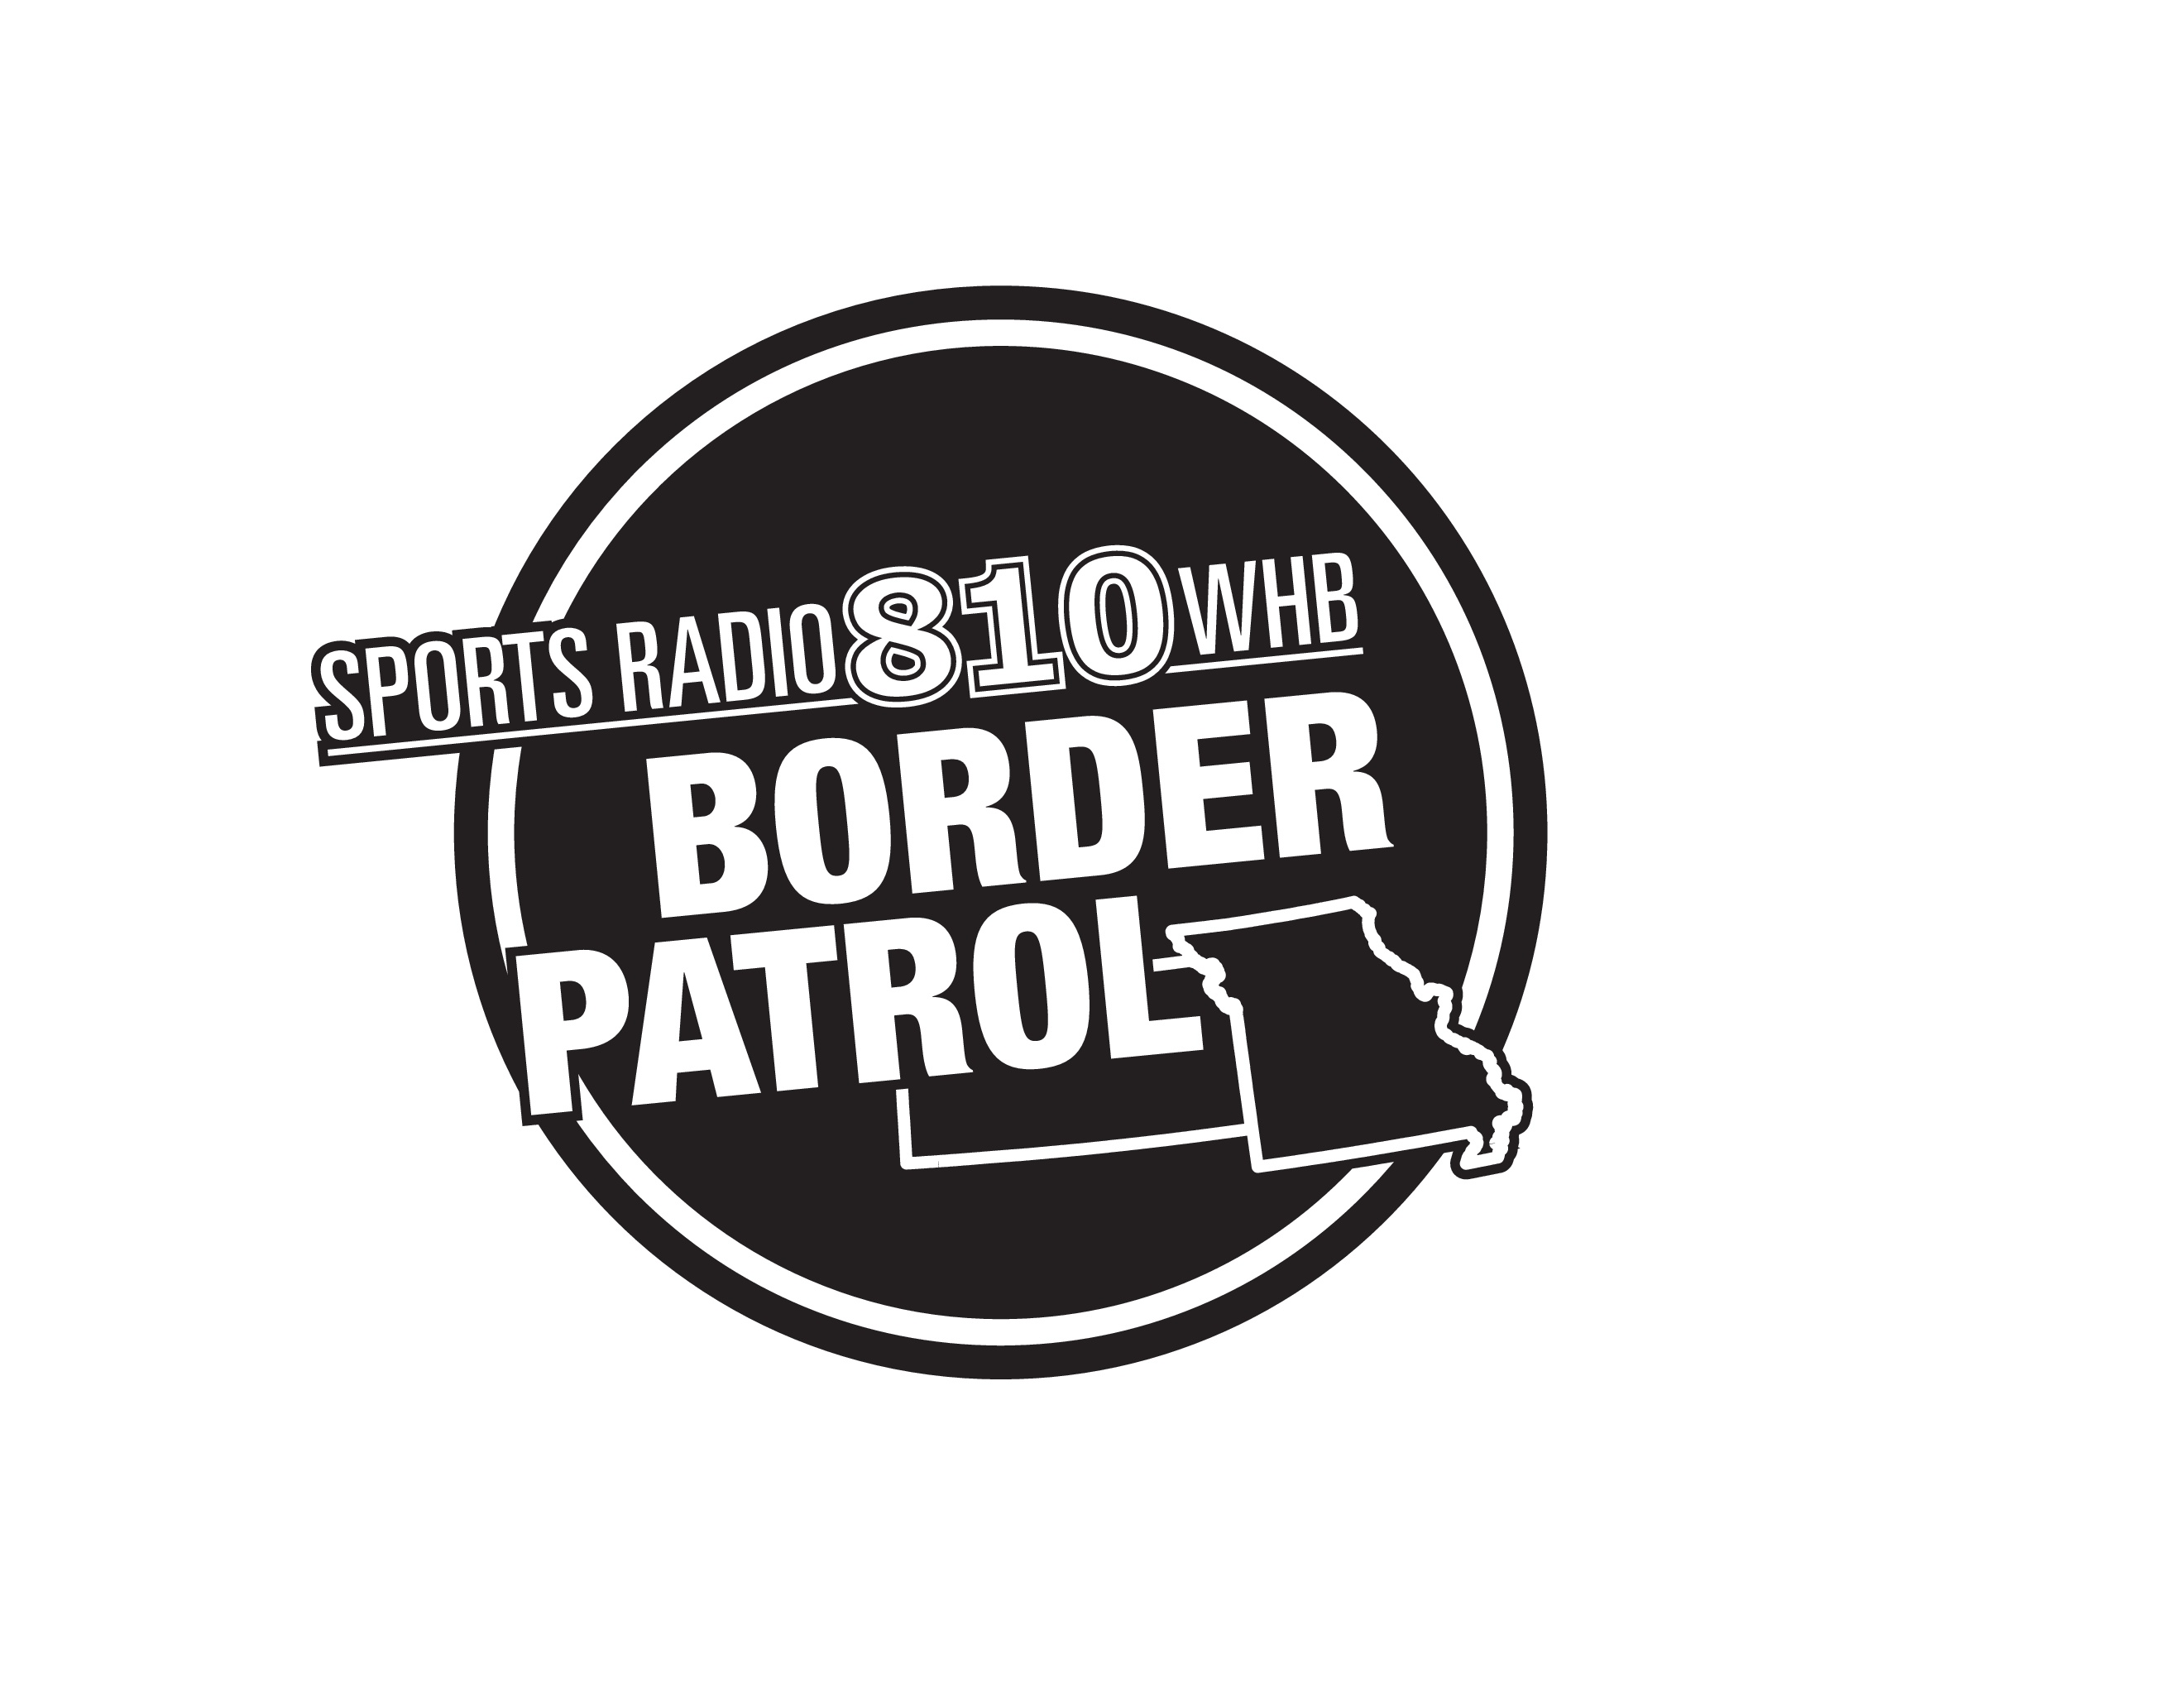 8-10-22 HR 1 of The Border Patrol on 38 The Spot